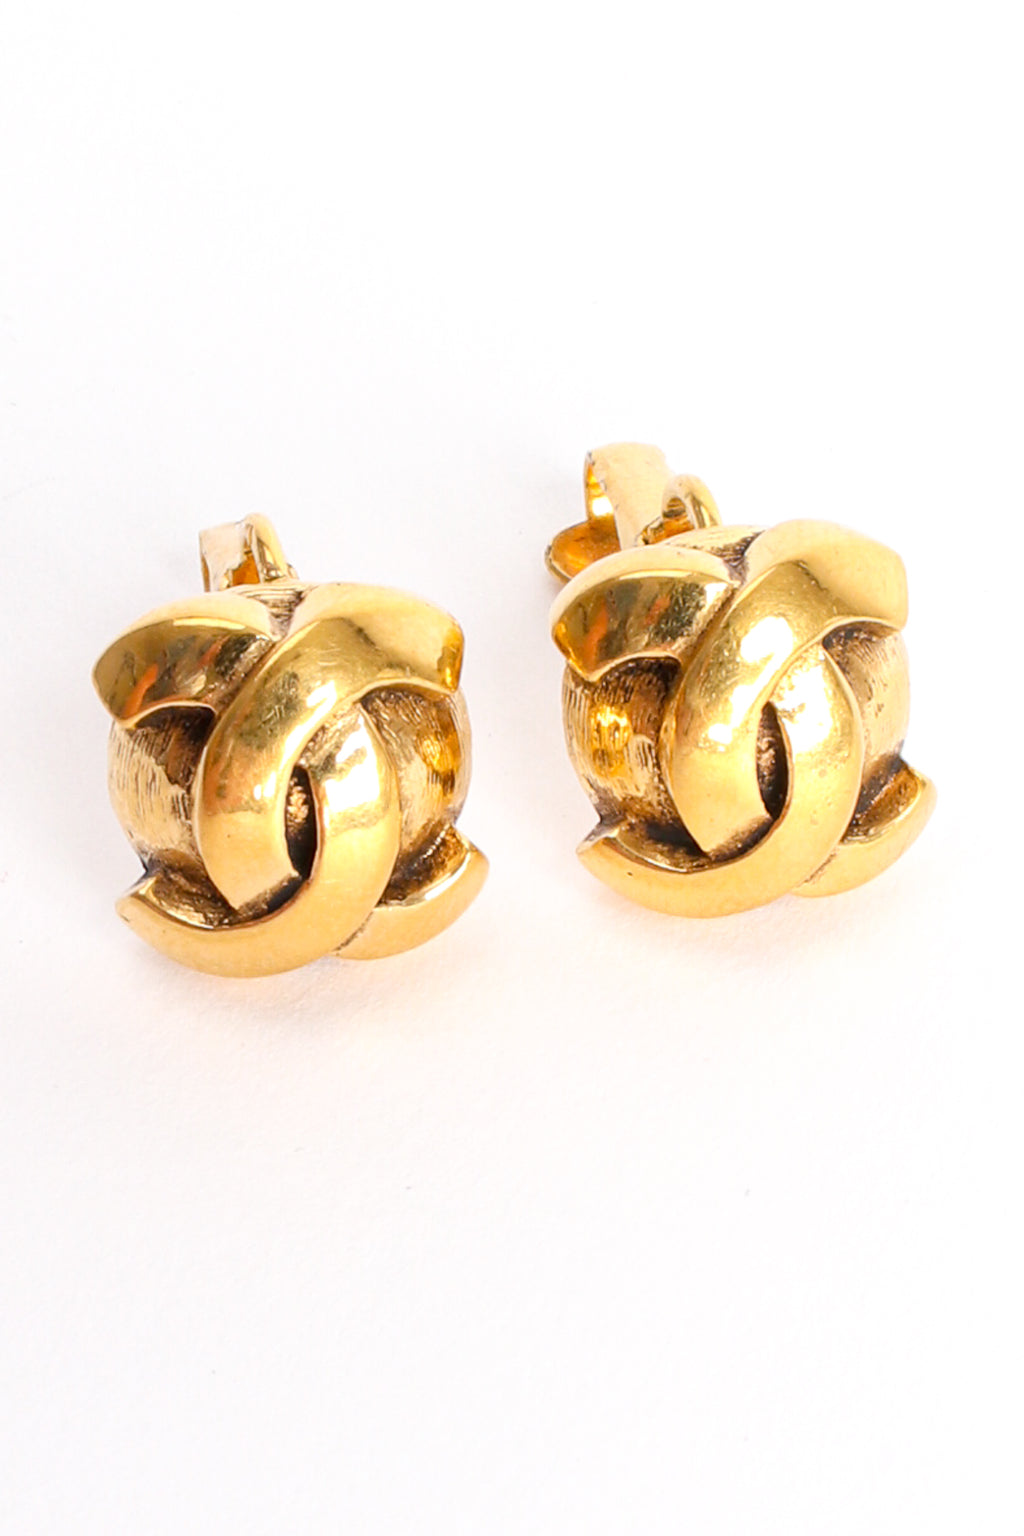 Shop authentic Chanel CC Logo Stud Earrings at revogue for just